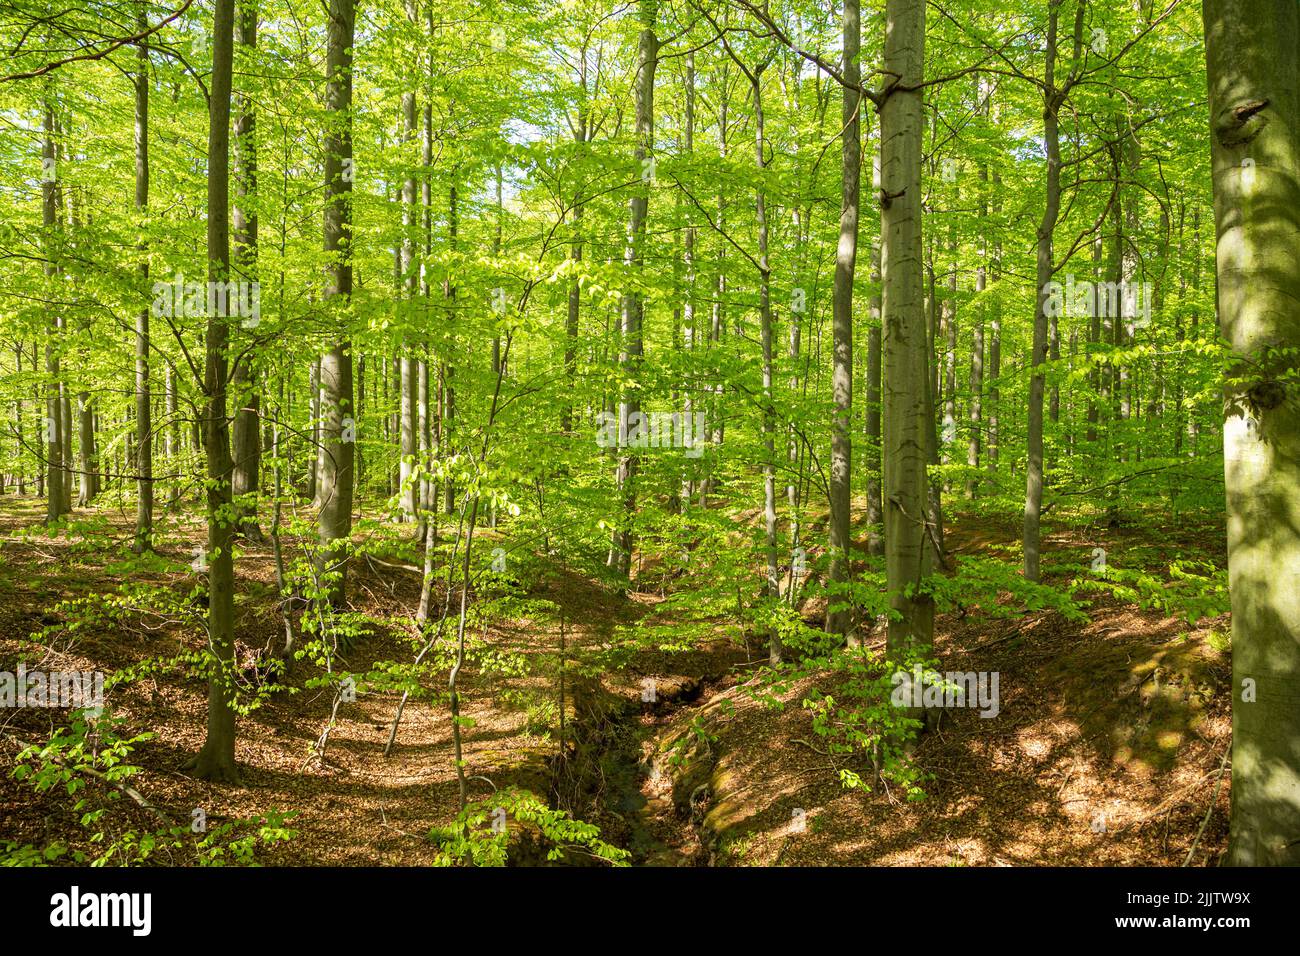 Green fresh forest in spring Stock Photo